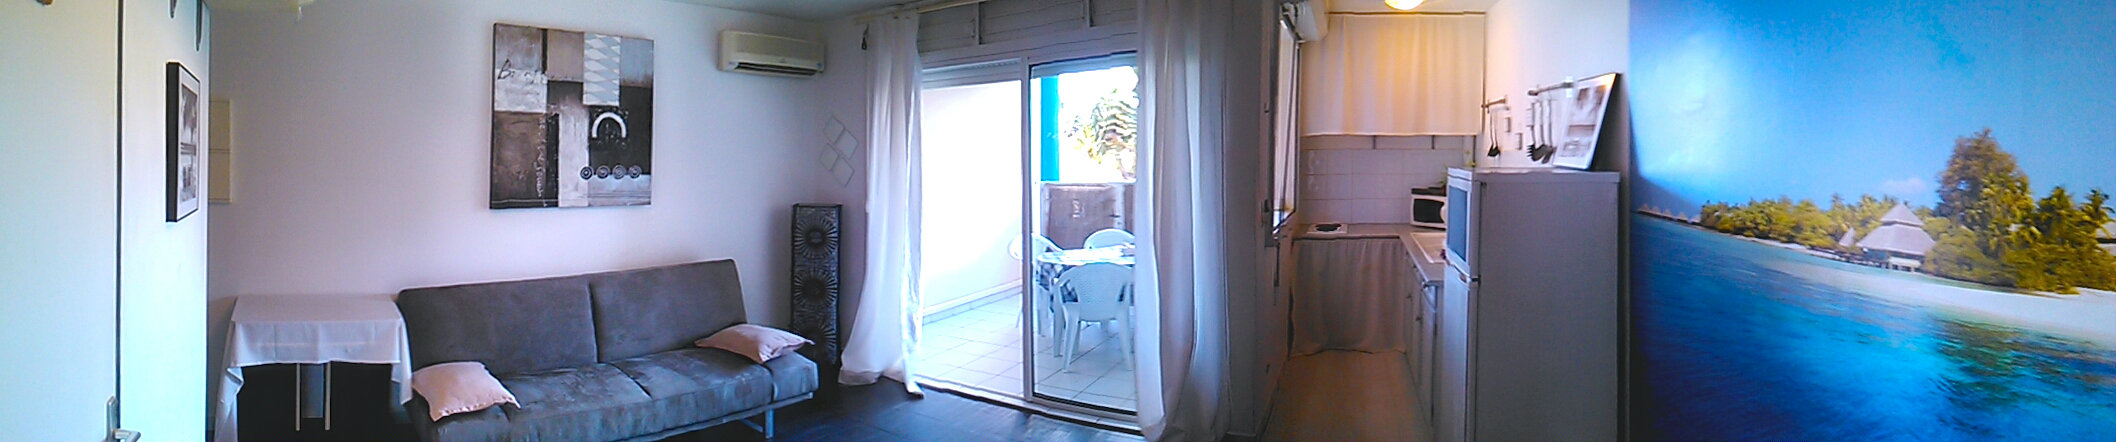 Studio in Trois ilets - Vacation, holiday rental ad # 39095 Picture #1 thumbnail